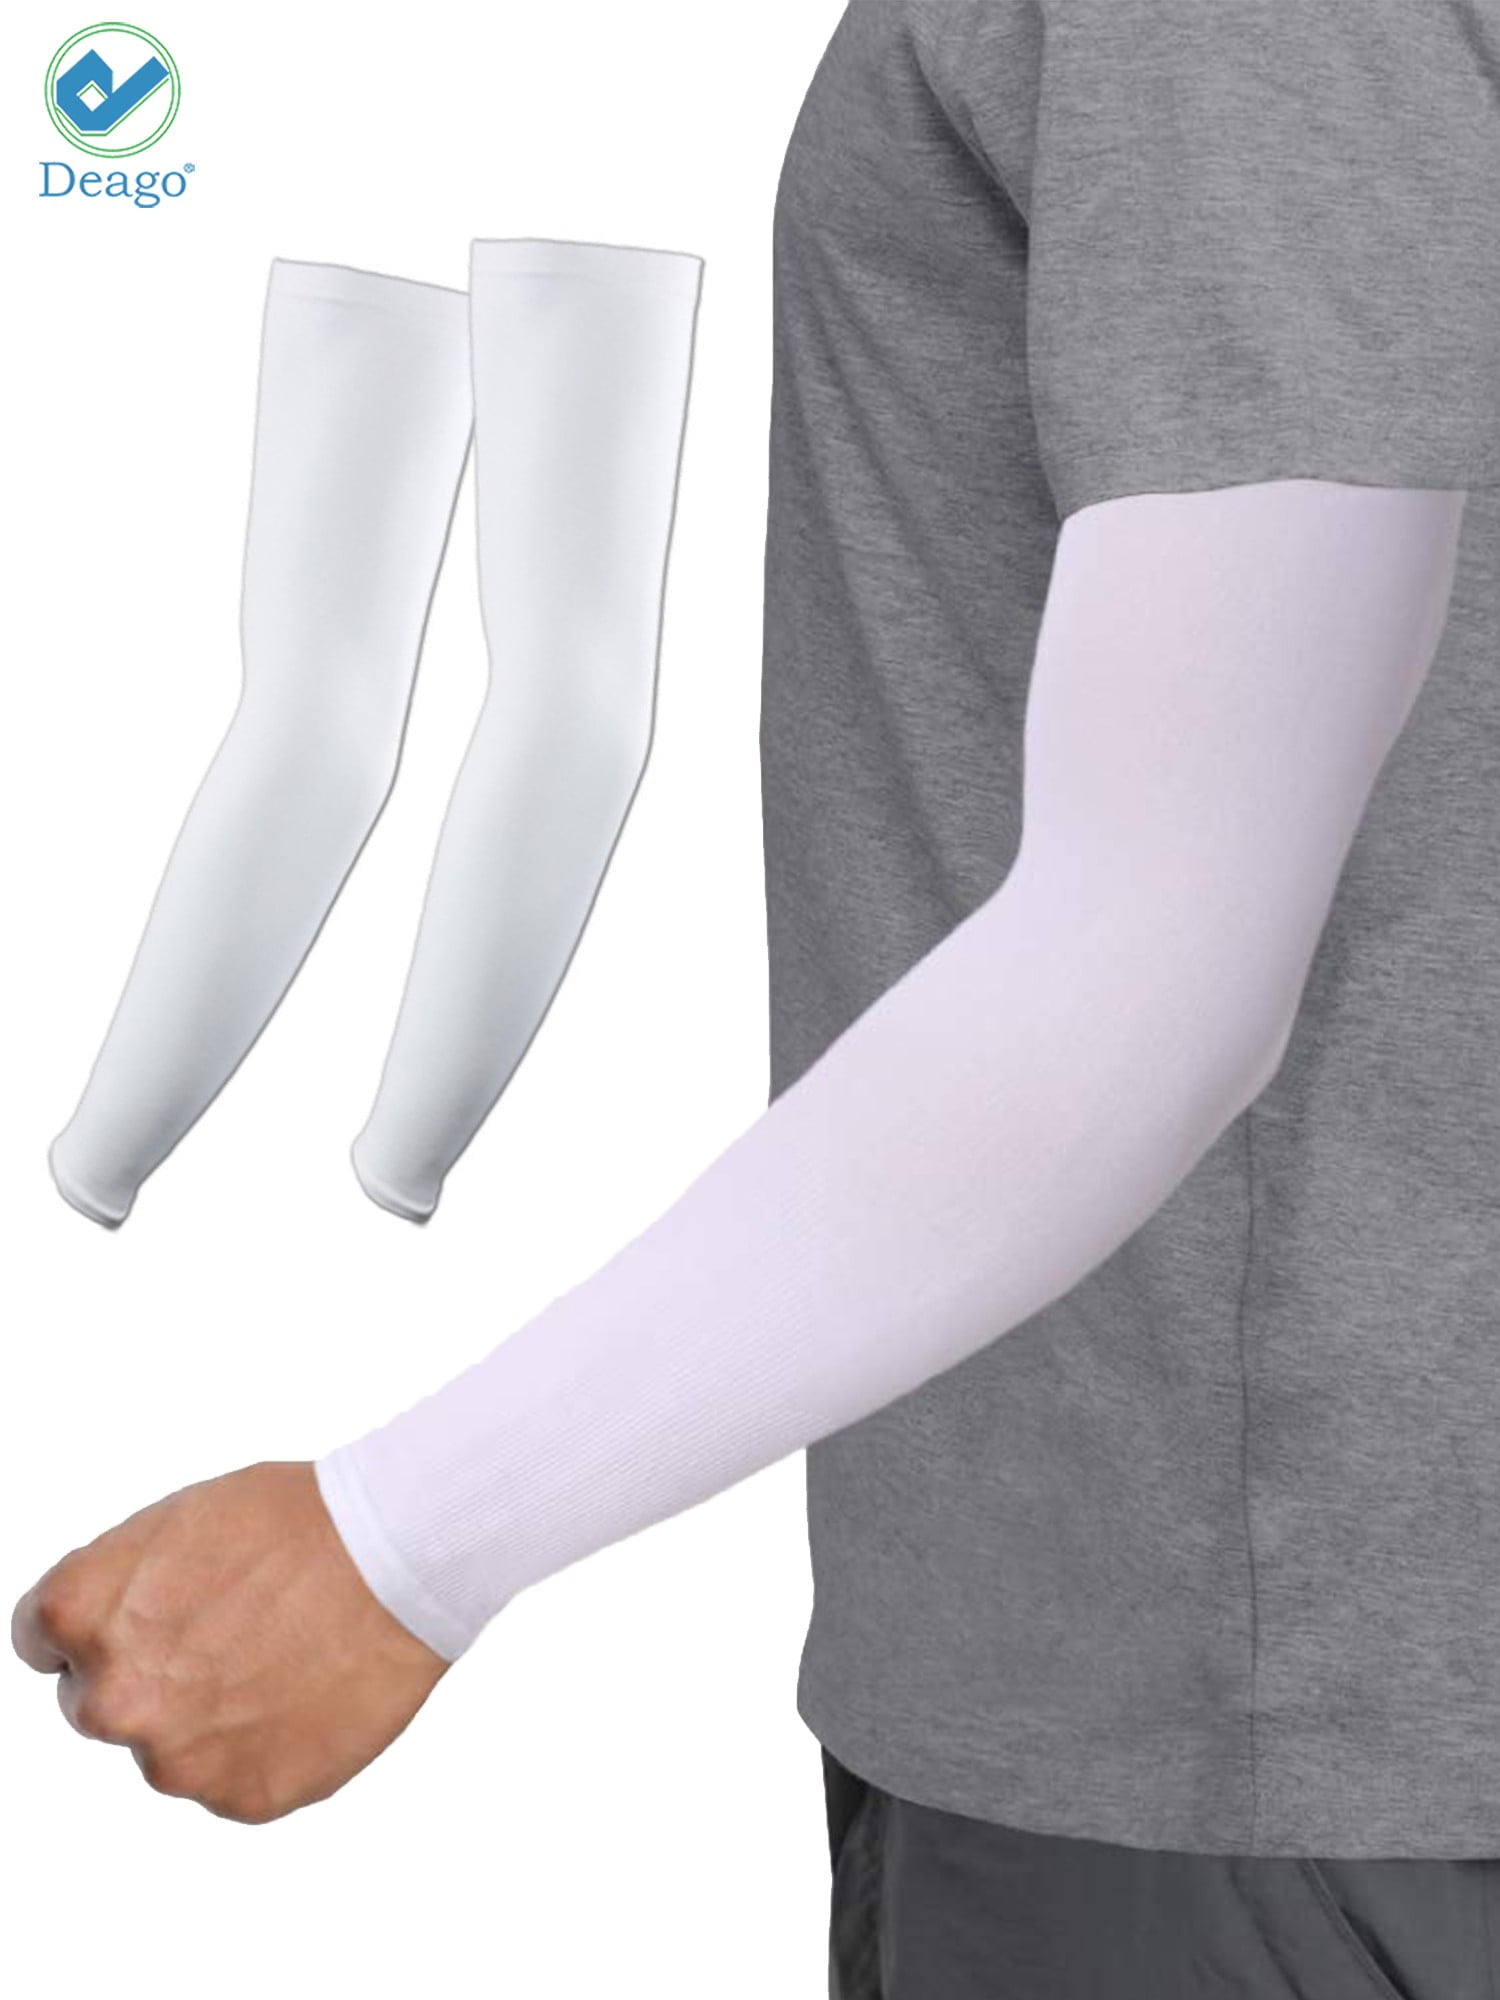 Running Football UV Cooling Protection Protector from Sun Rays Cycling Gaming Baseball Athletic Sleeve 1 Sleeve B-Driven Sports Basketball Compression Arm Sleeves for Men & Women